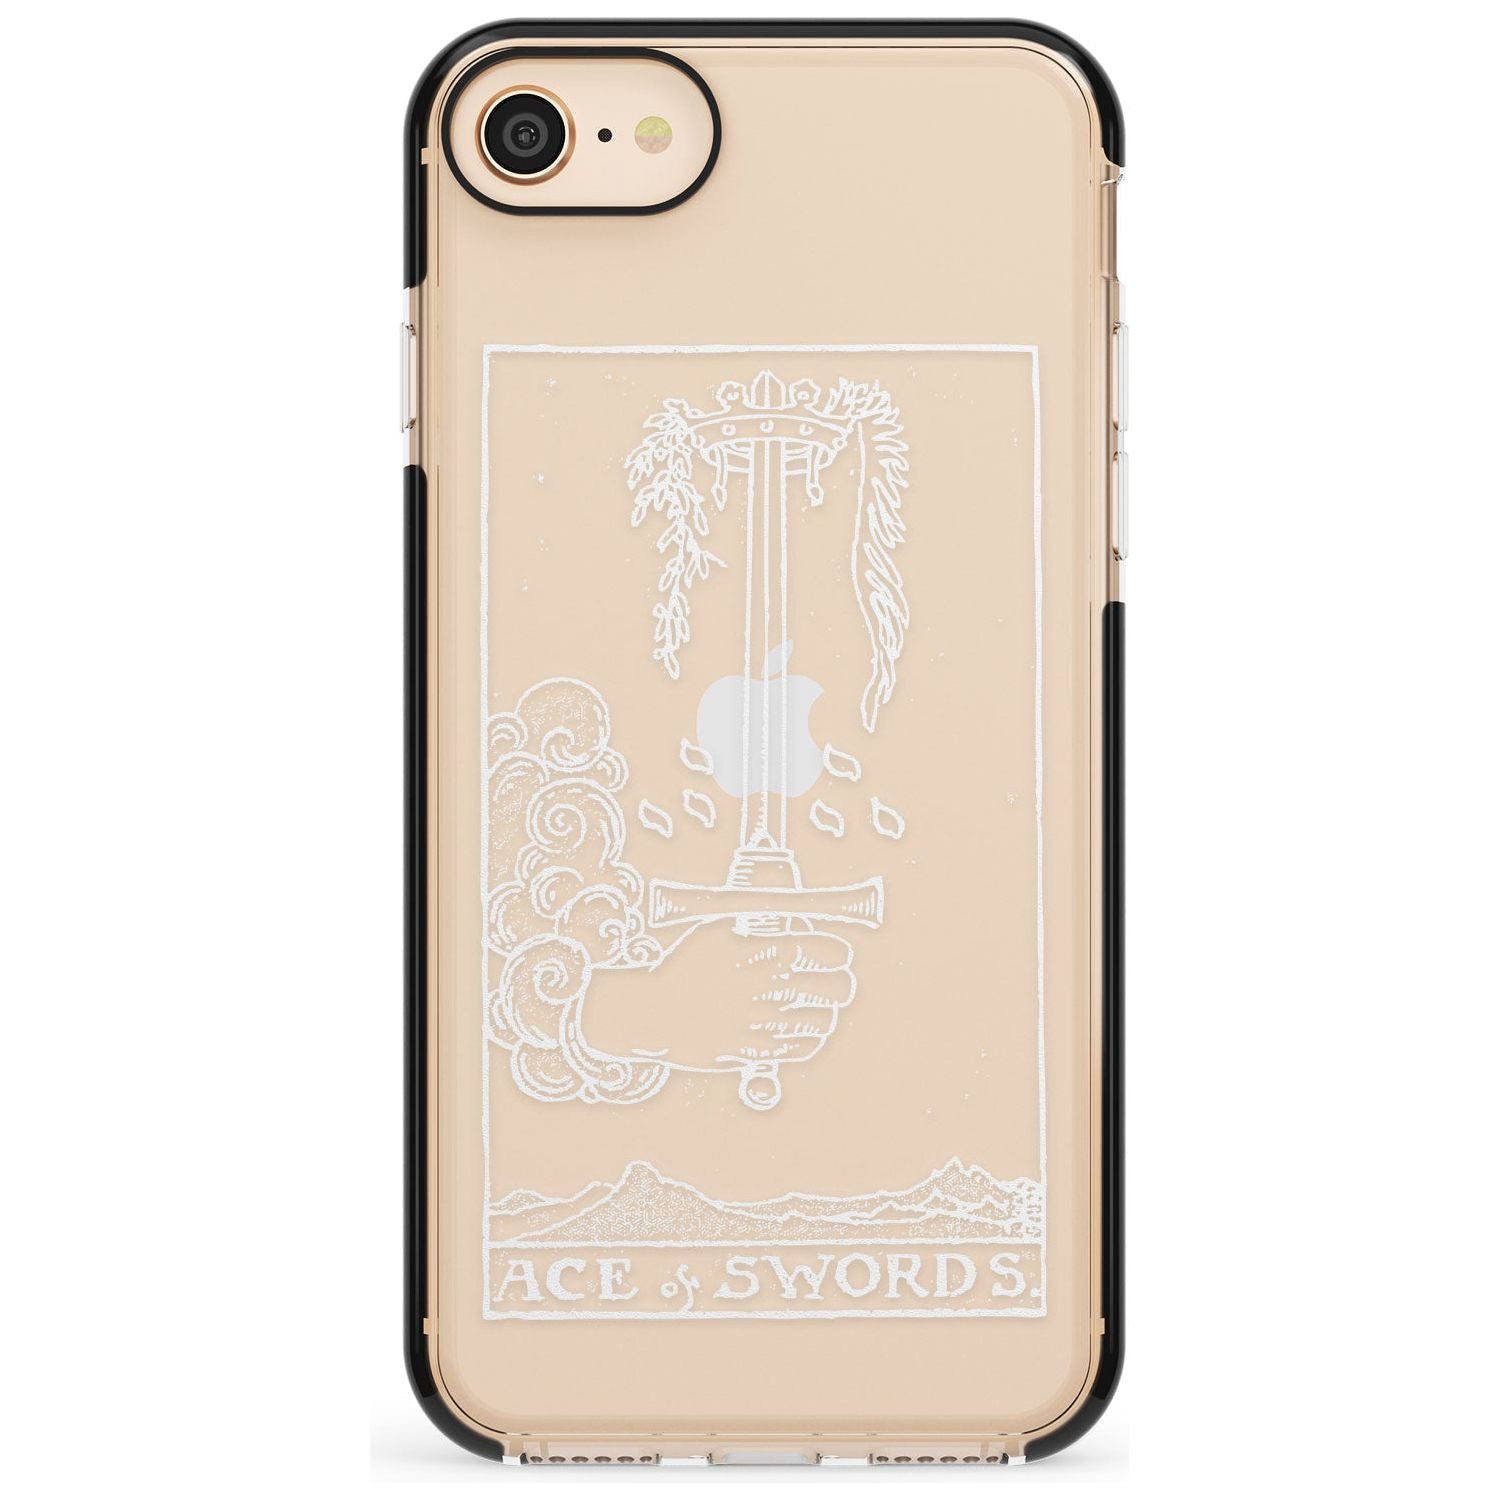 Ace of Swords Tarot Card - White Transparent Pink Fade Impact Phone Case for iPhone SE 8 7 Plus